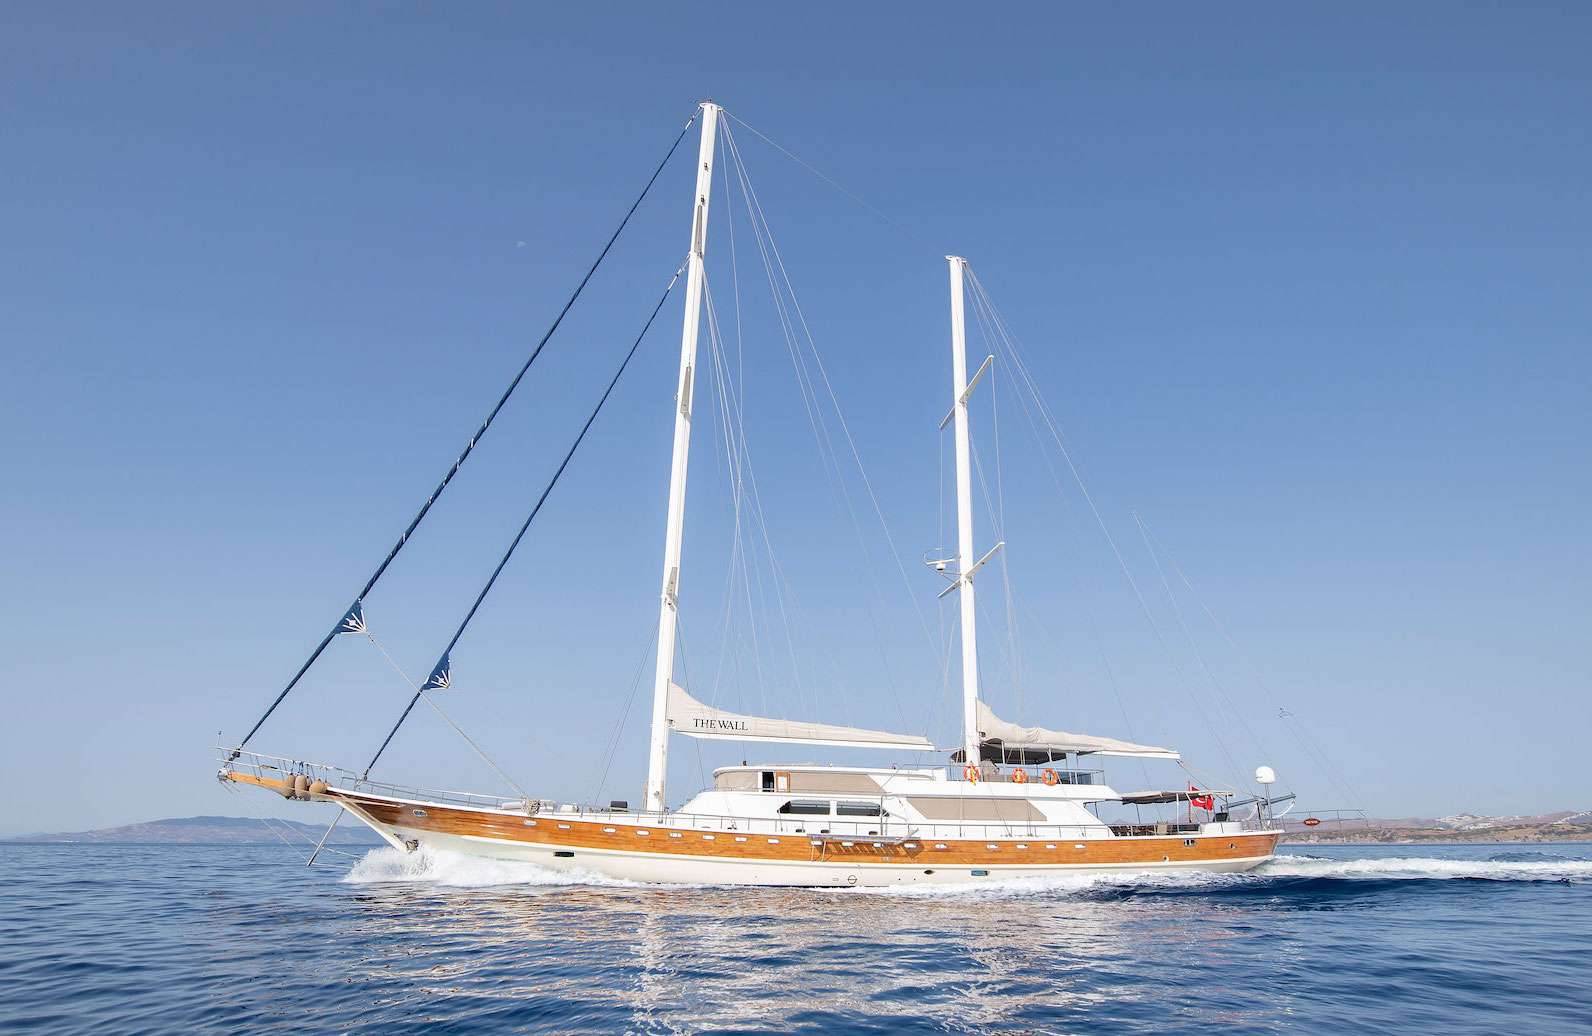 THE WALL Yacht Charter - Ritzy Charters